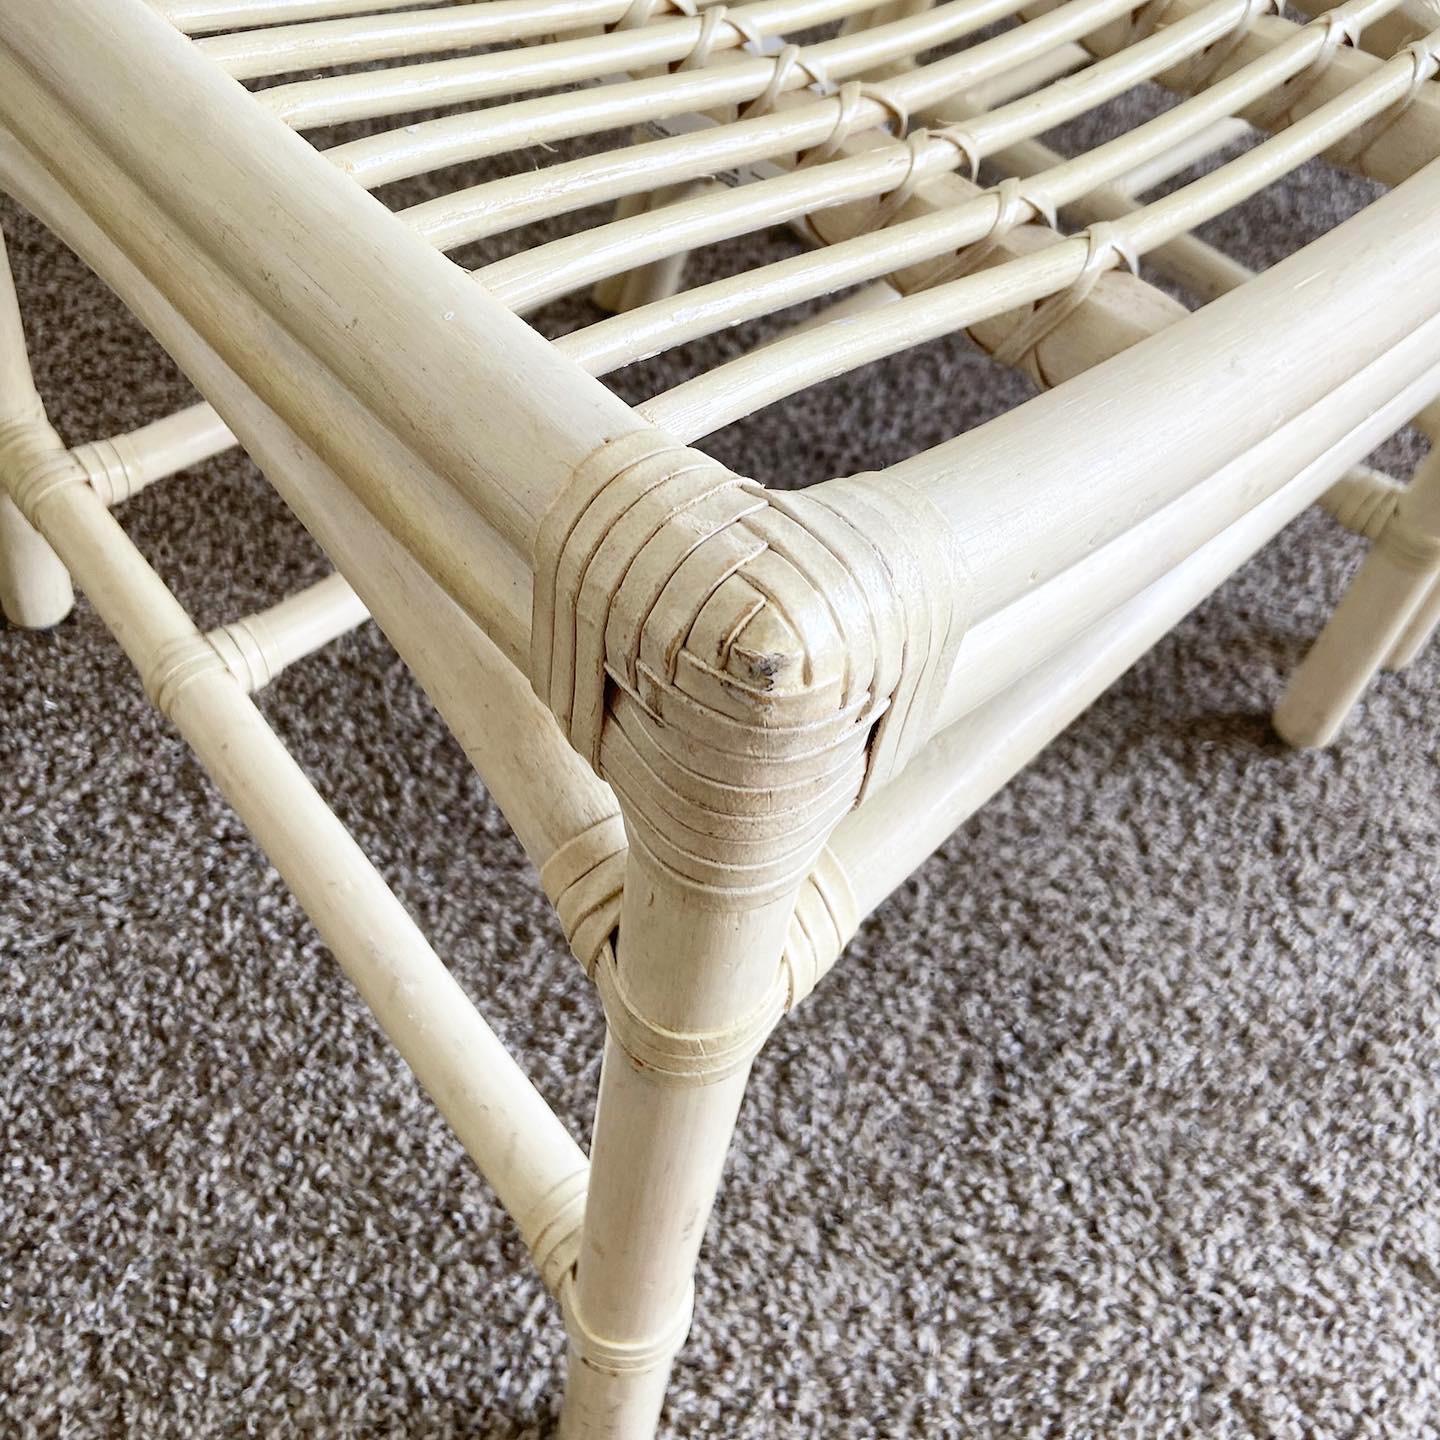 The Boho Chic Cream Bamboo Rattan Dining Chairs are a beautiful fusion of bohemian charm and natural elegance. With a tranquil cream finish and meticulously crafted details, these chairs bring warmth and style to your dining space.

Boho chic